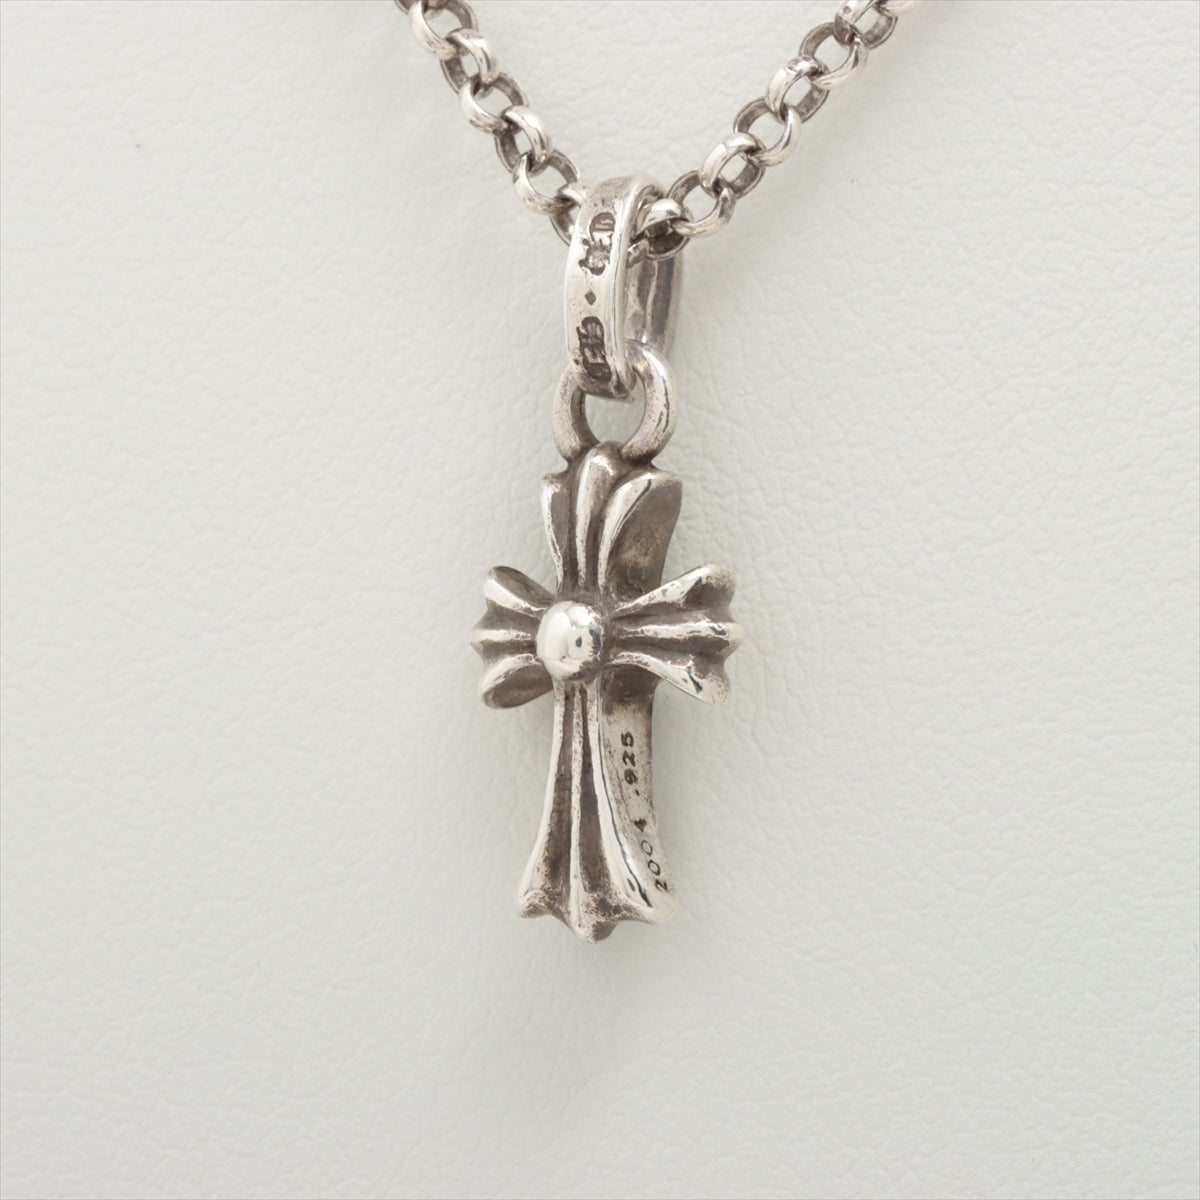 Chrome Hearts CH Cross Baby fat charms Necklace 925 7.4g Roll Chain 18 Inches